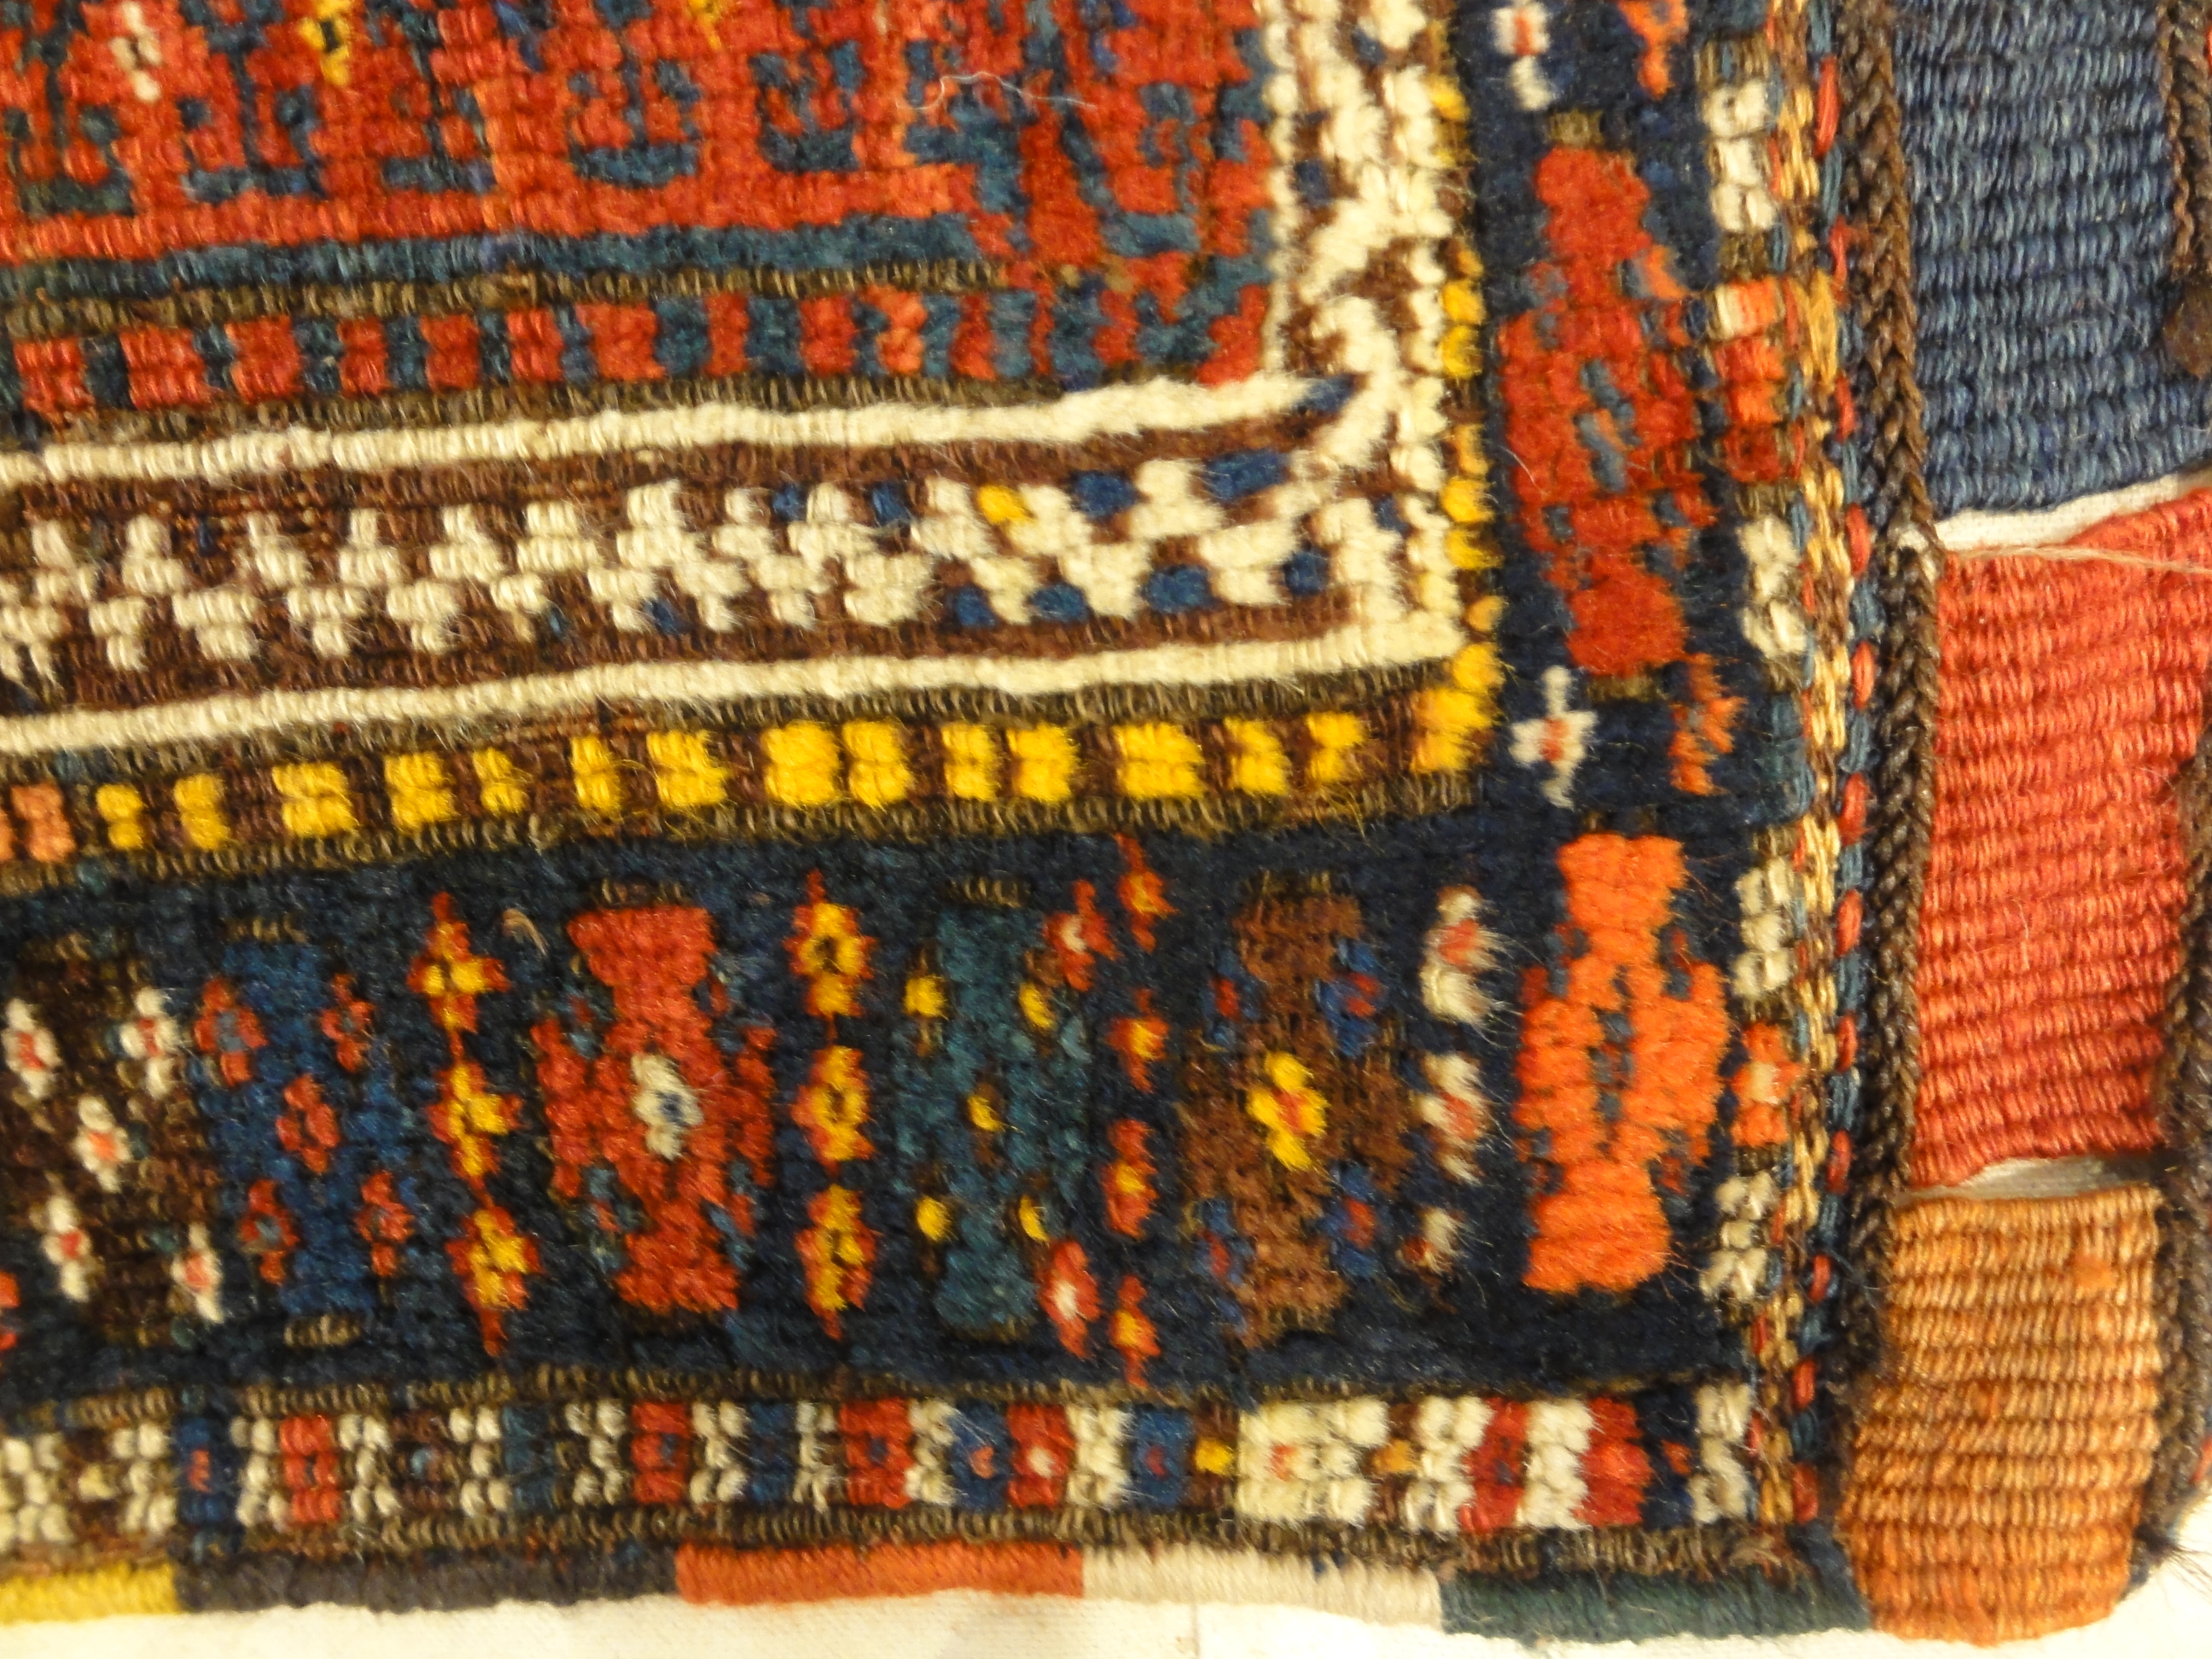 Antique W. Persian Jaf Kurd. Rugs & More in the Santa Barbara Design Center. This is a very well woven bagface, making the old bagfaces very rare.